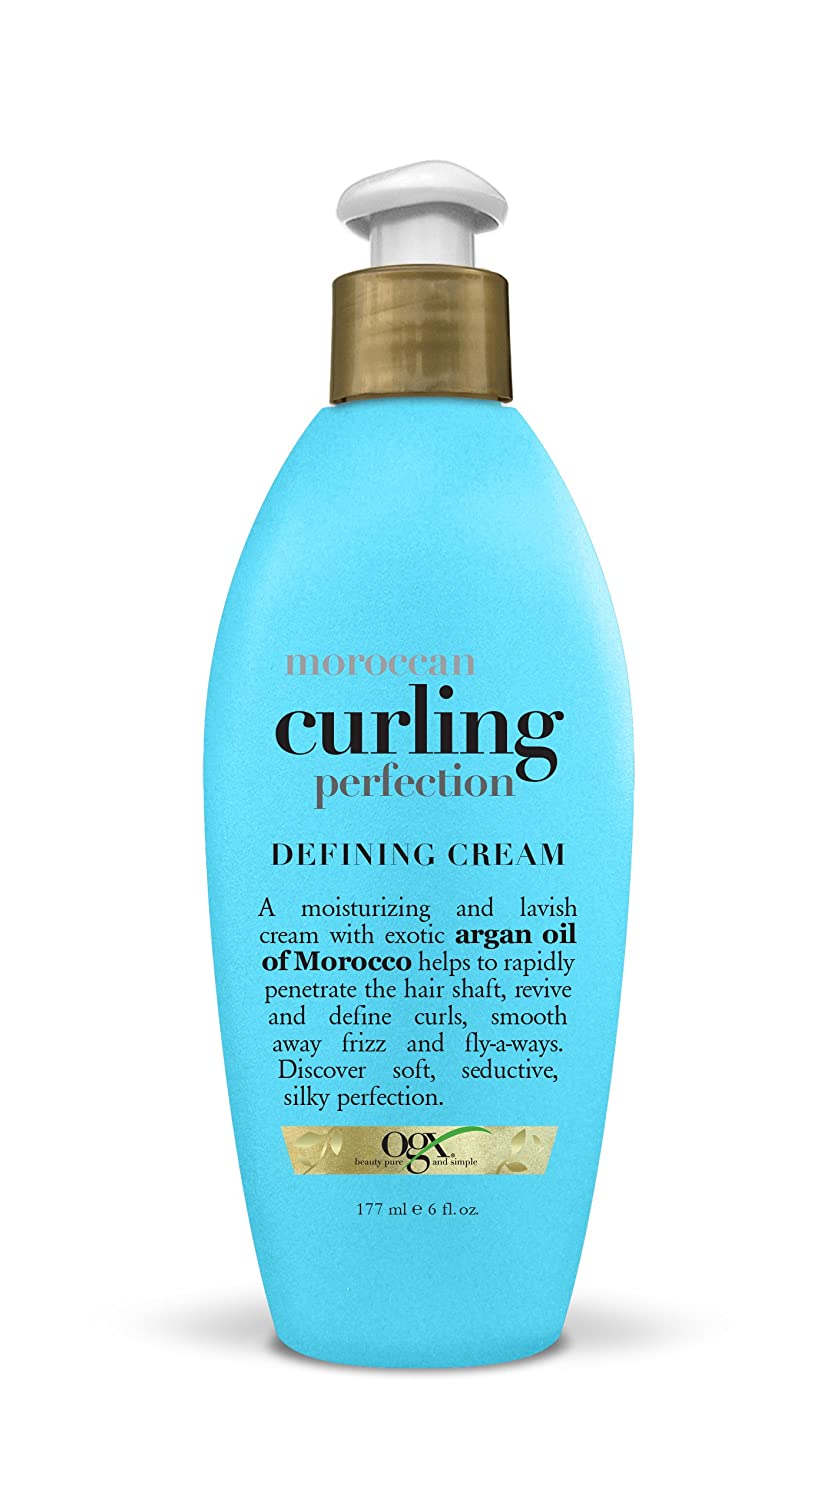 Ogx Moroccan Curling Perfection